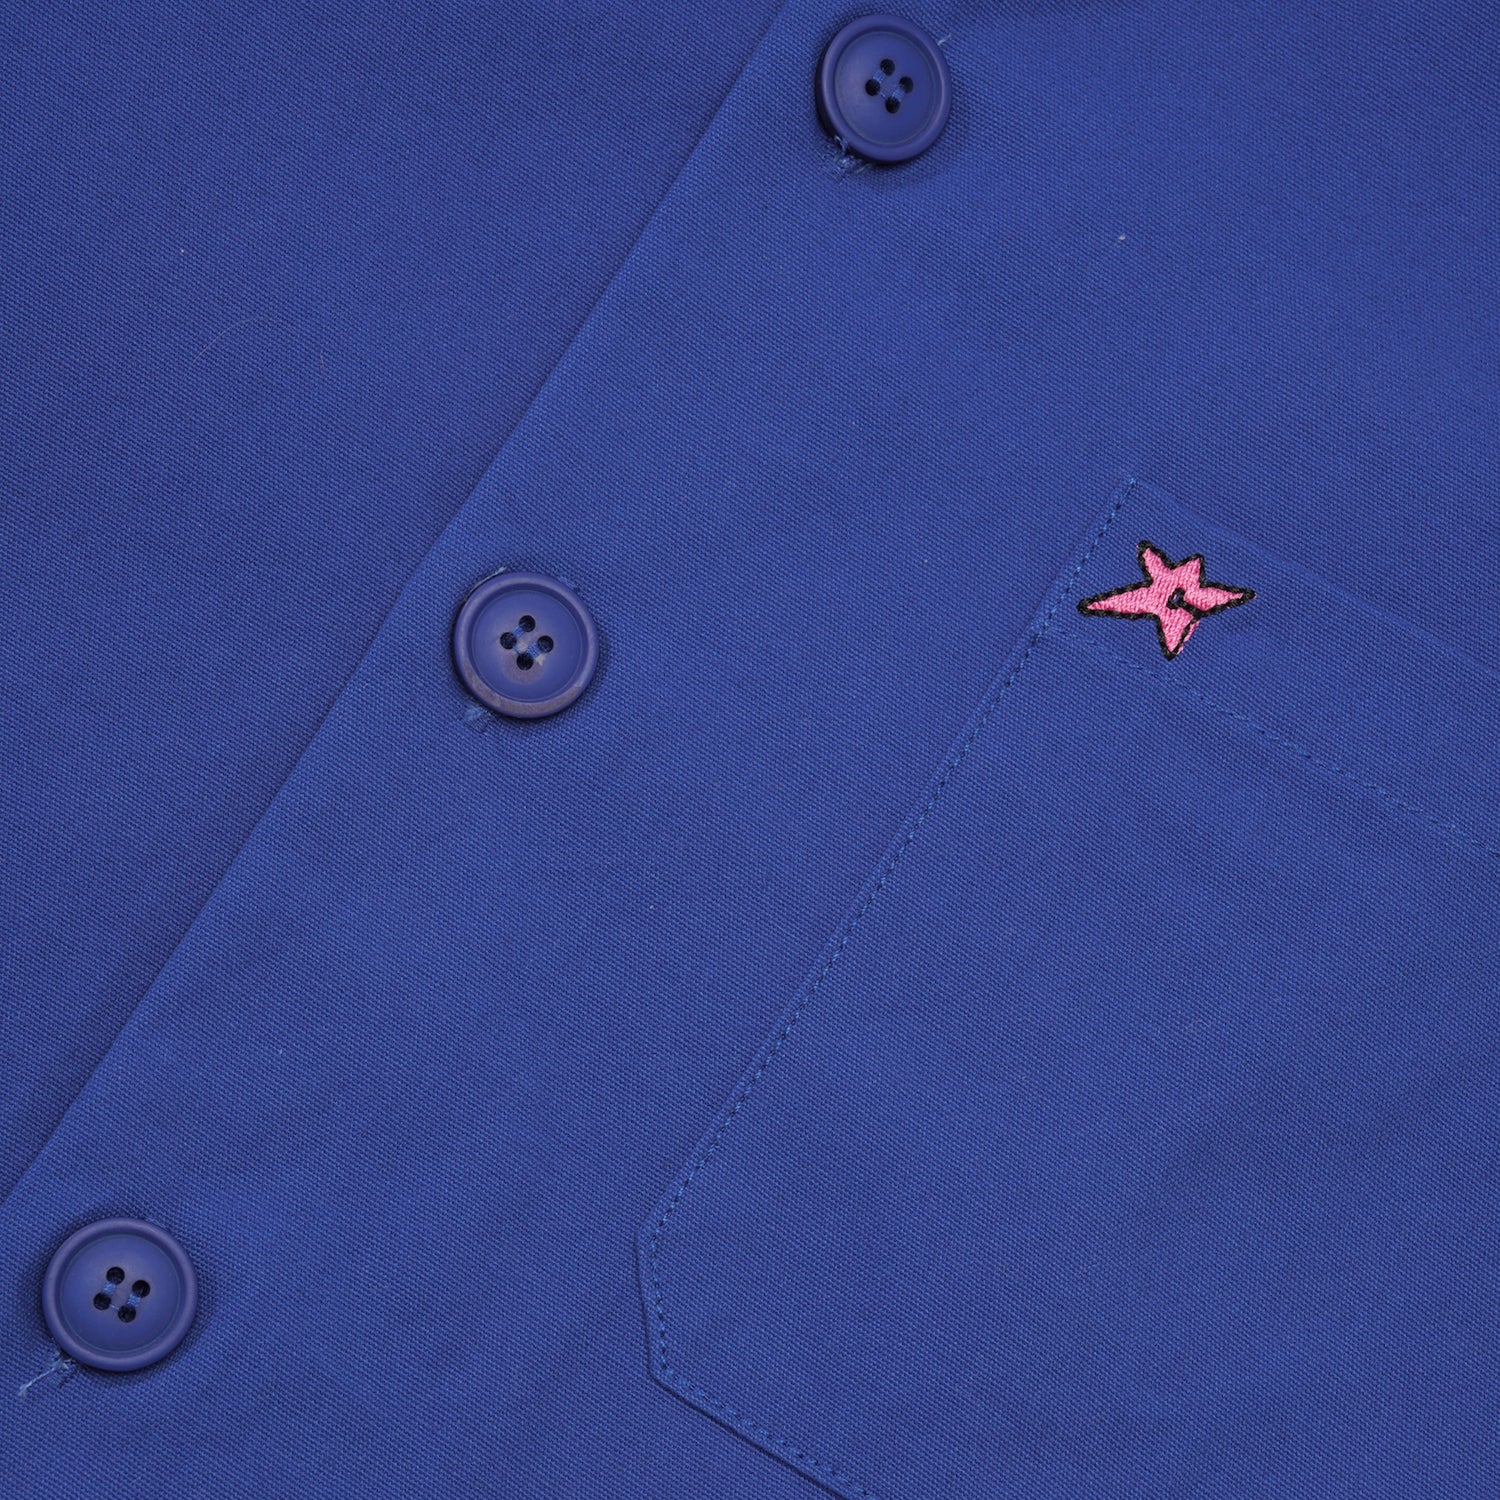 C-Star Button Up Shirt, Periwinkle